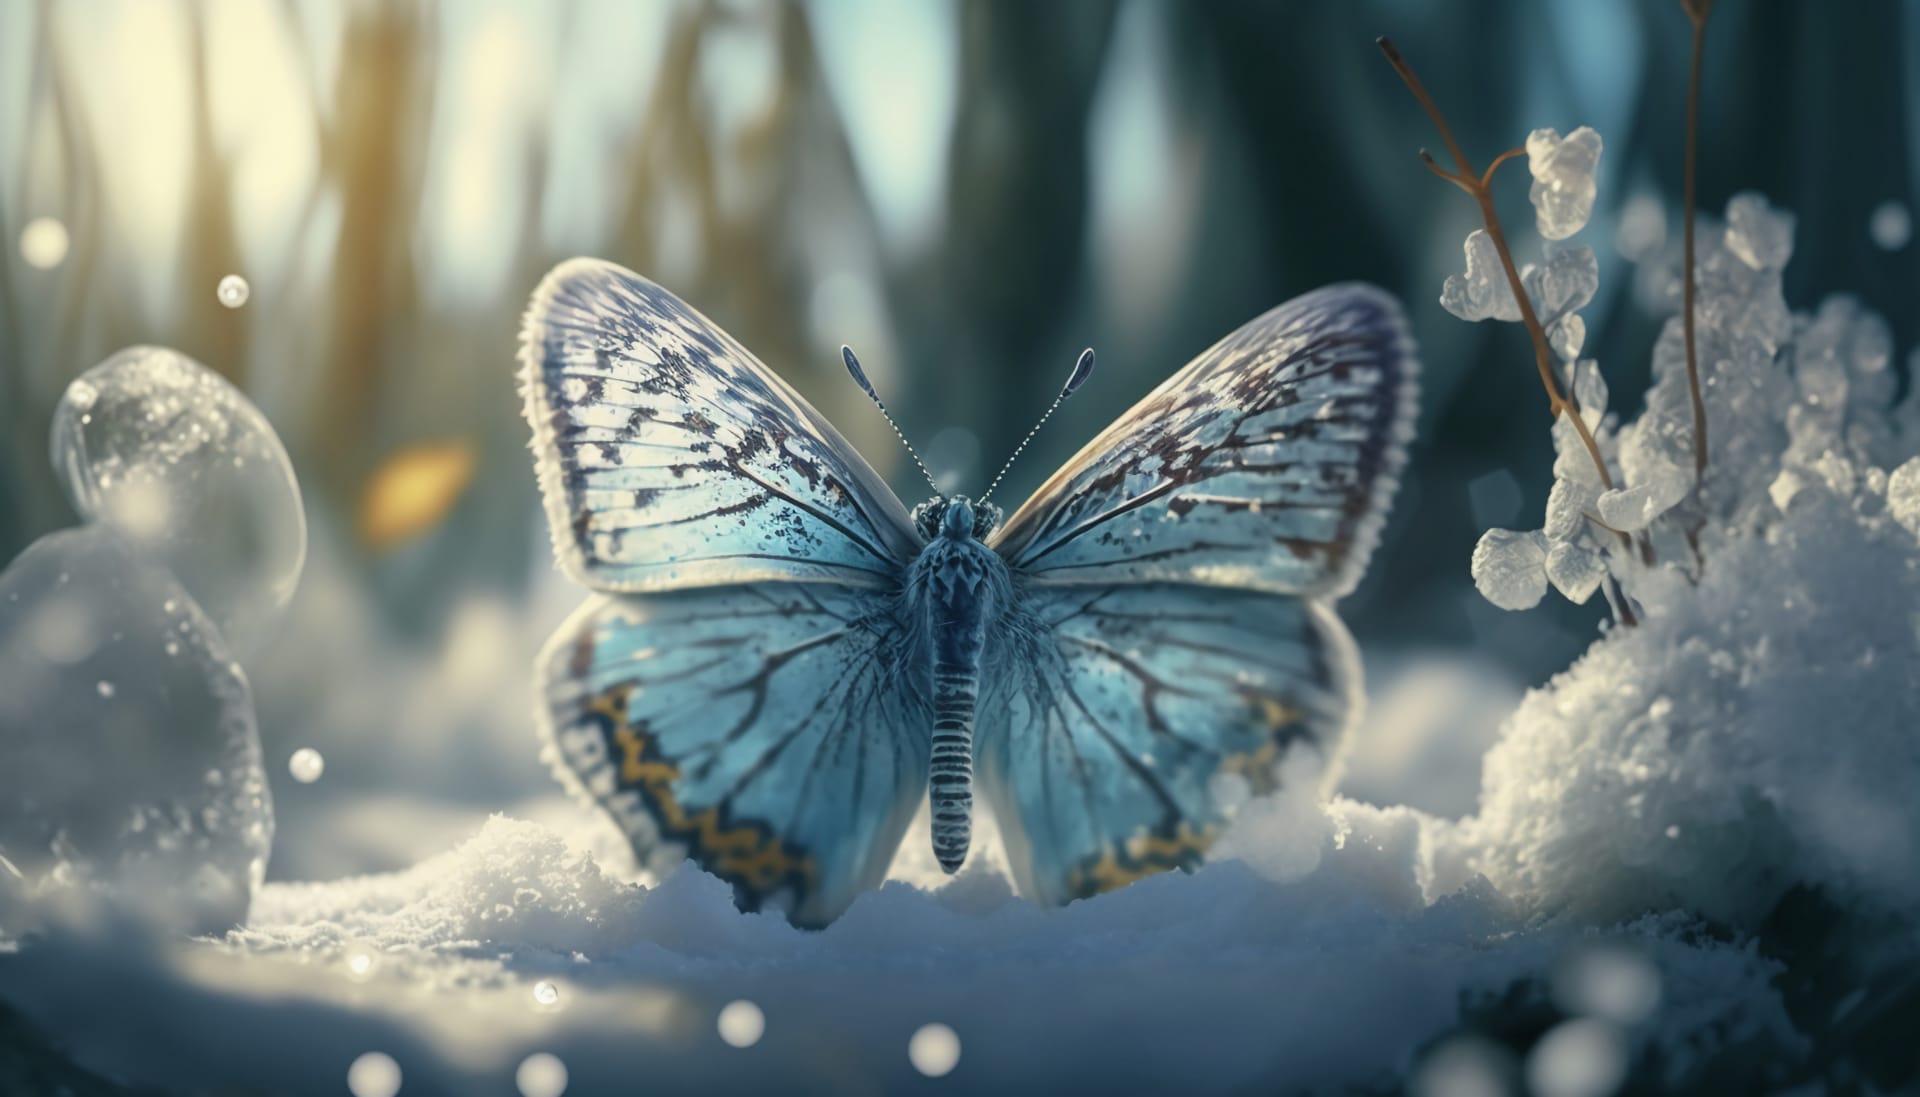 Ice snowa light blue ice butterfly falls excellent picture